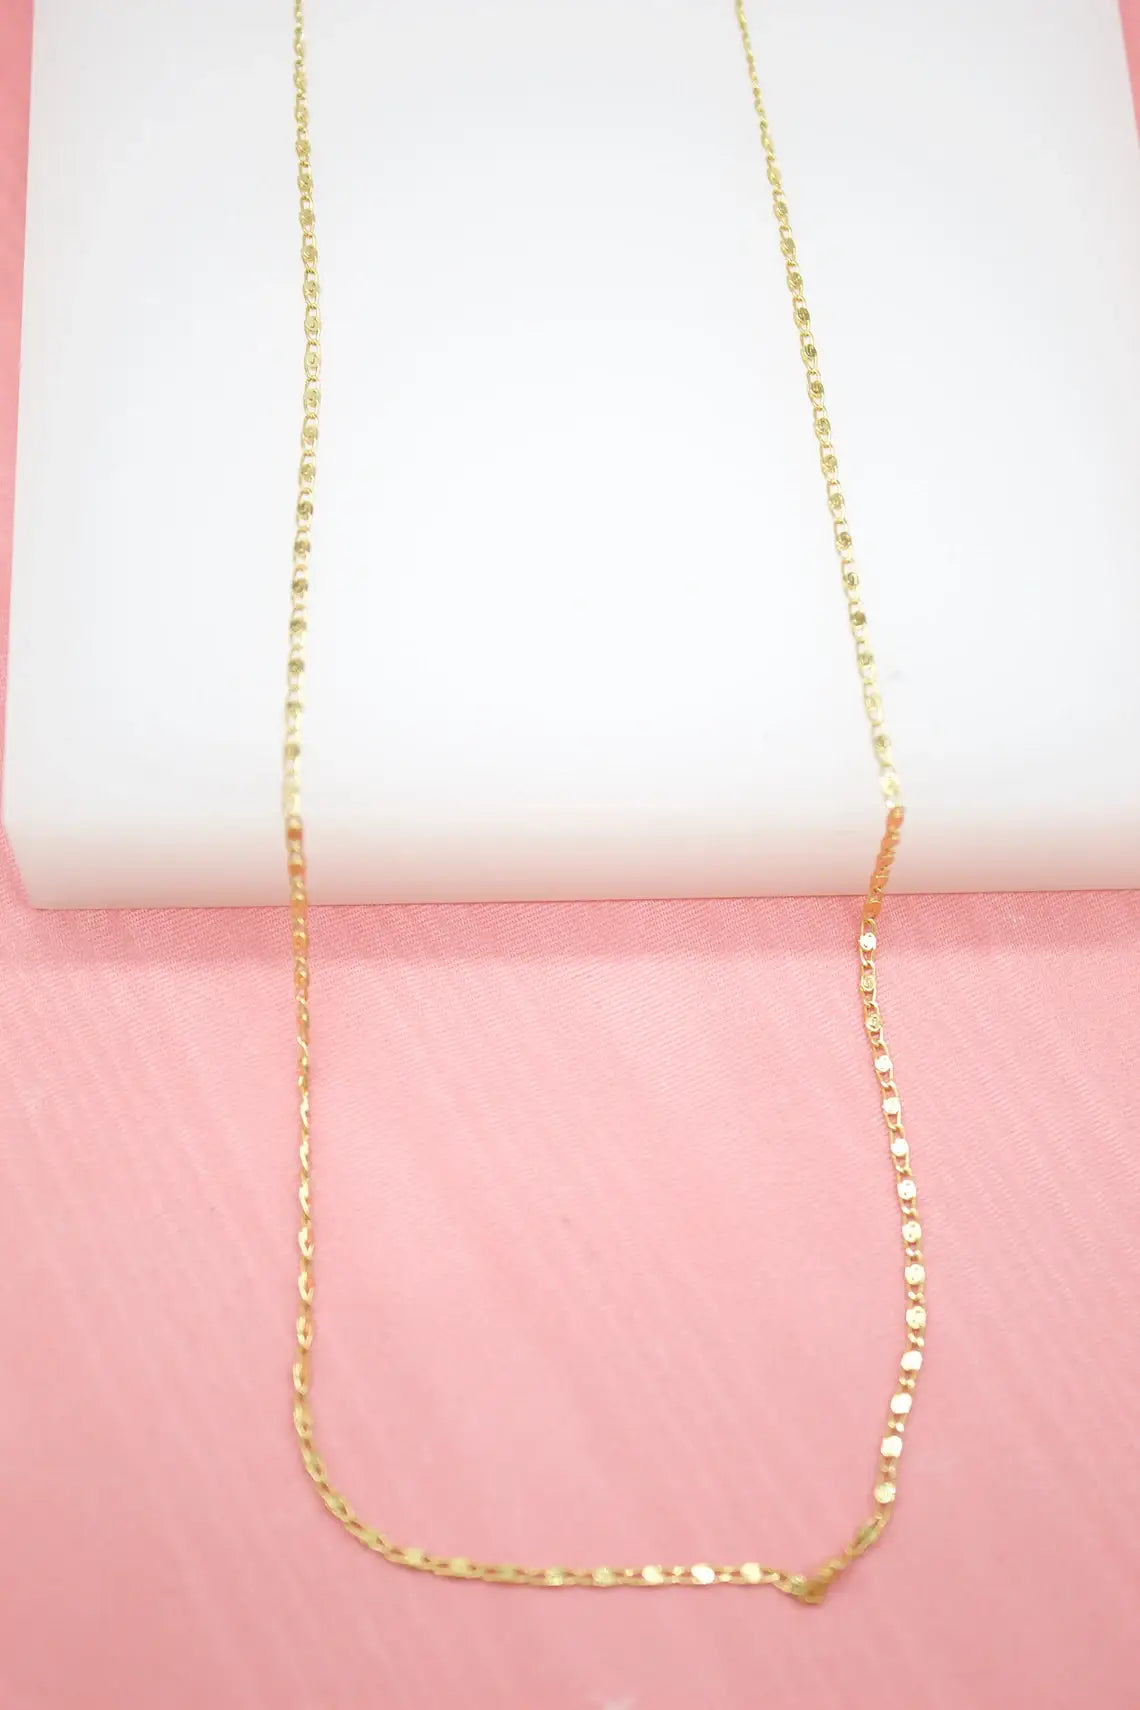 MIA Jewelry - 18K Gold Filled 1mm Link Chain (F70)